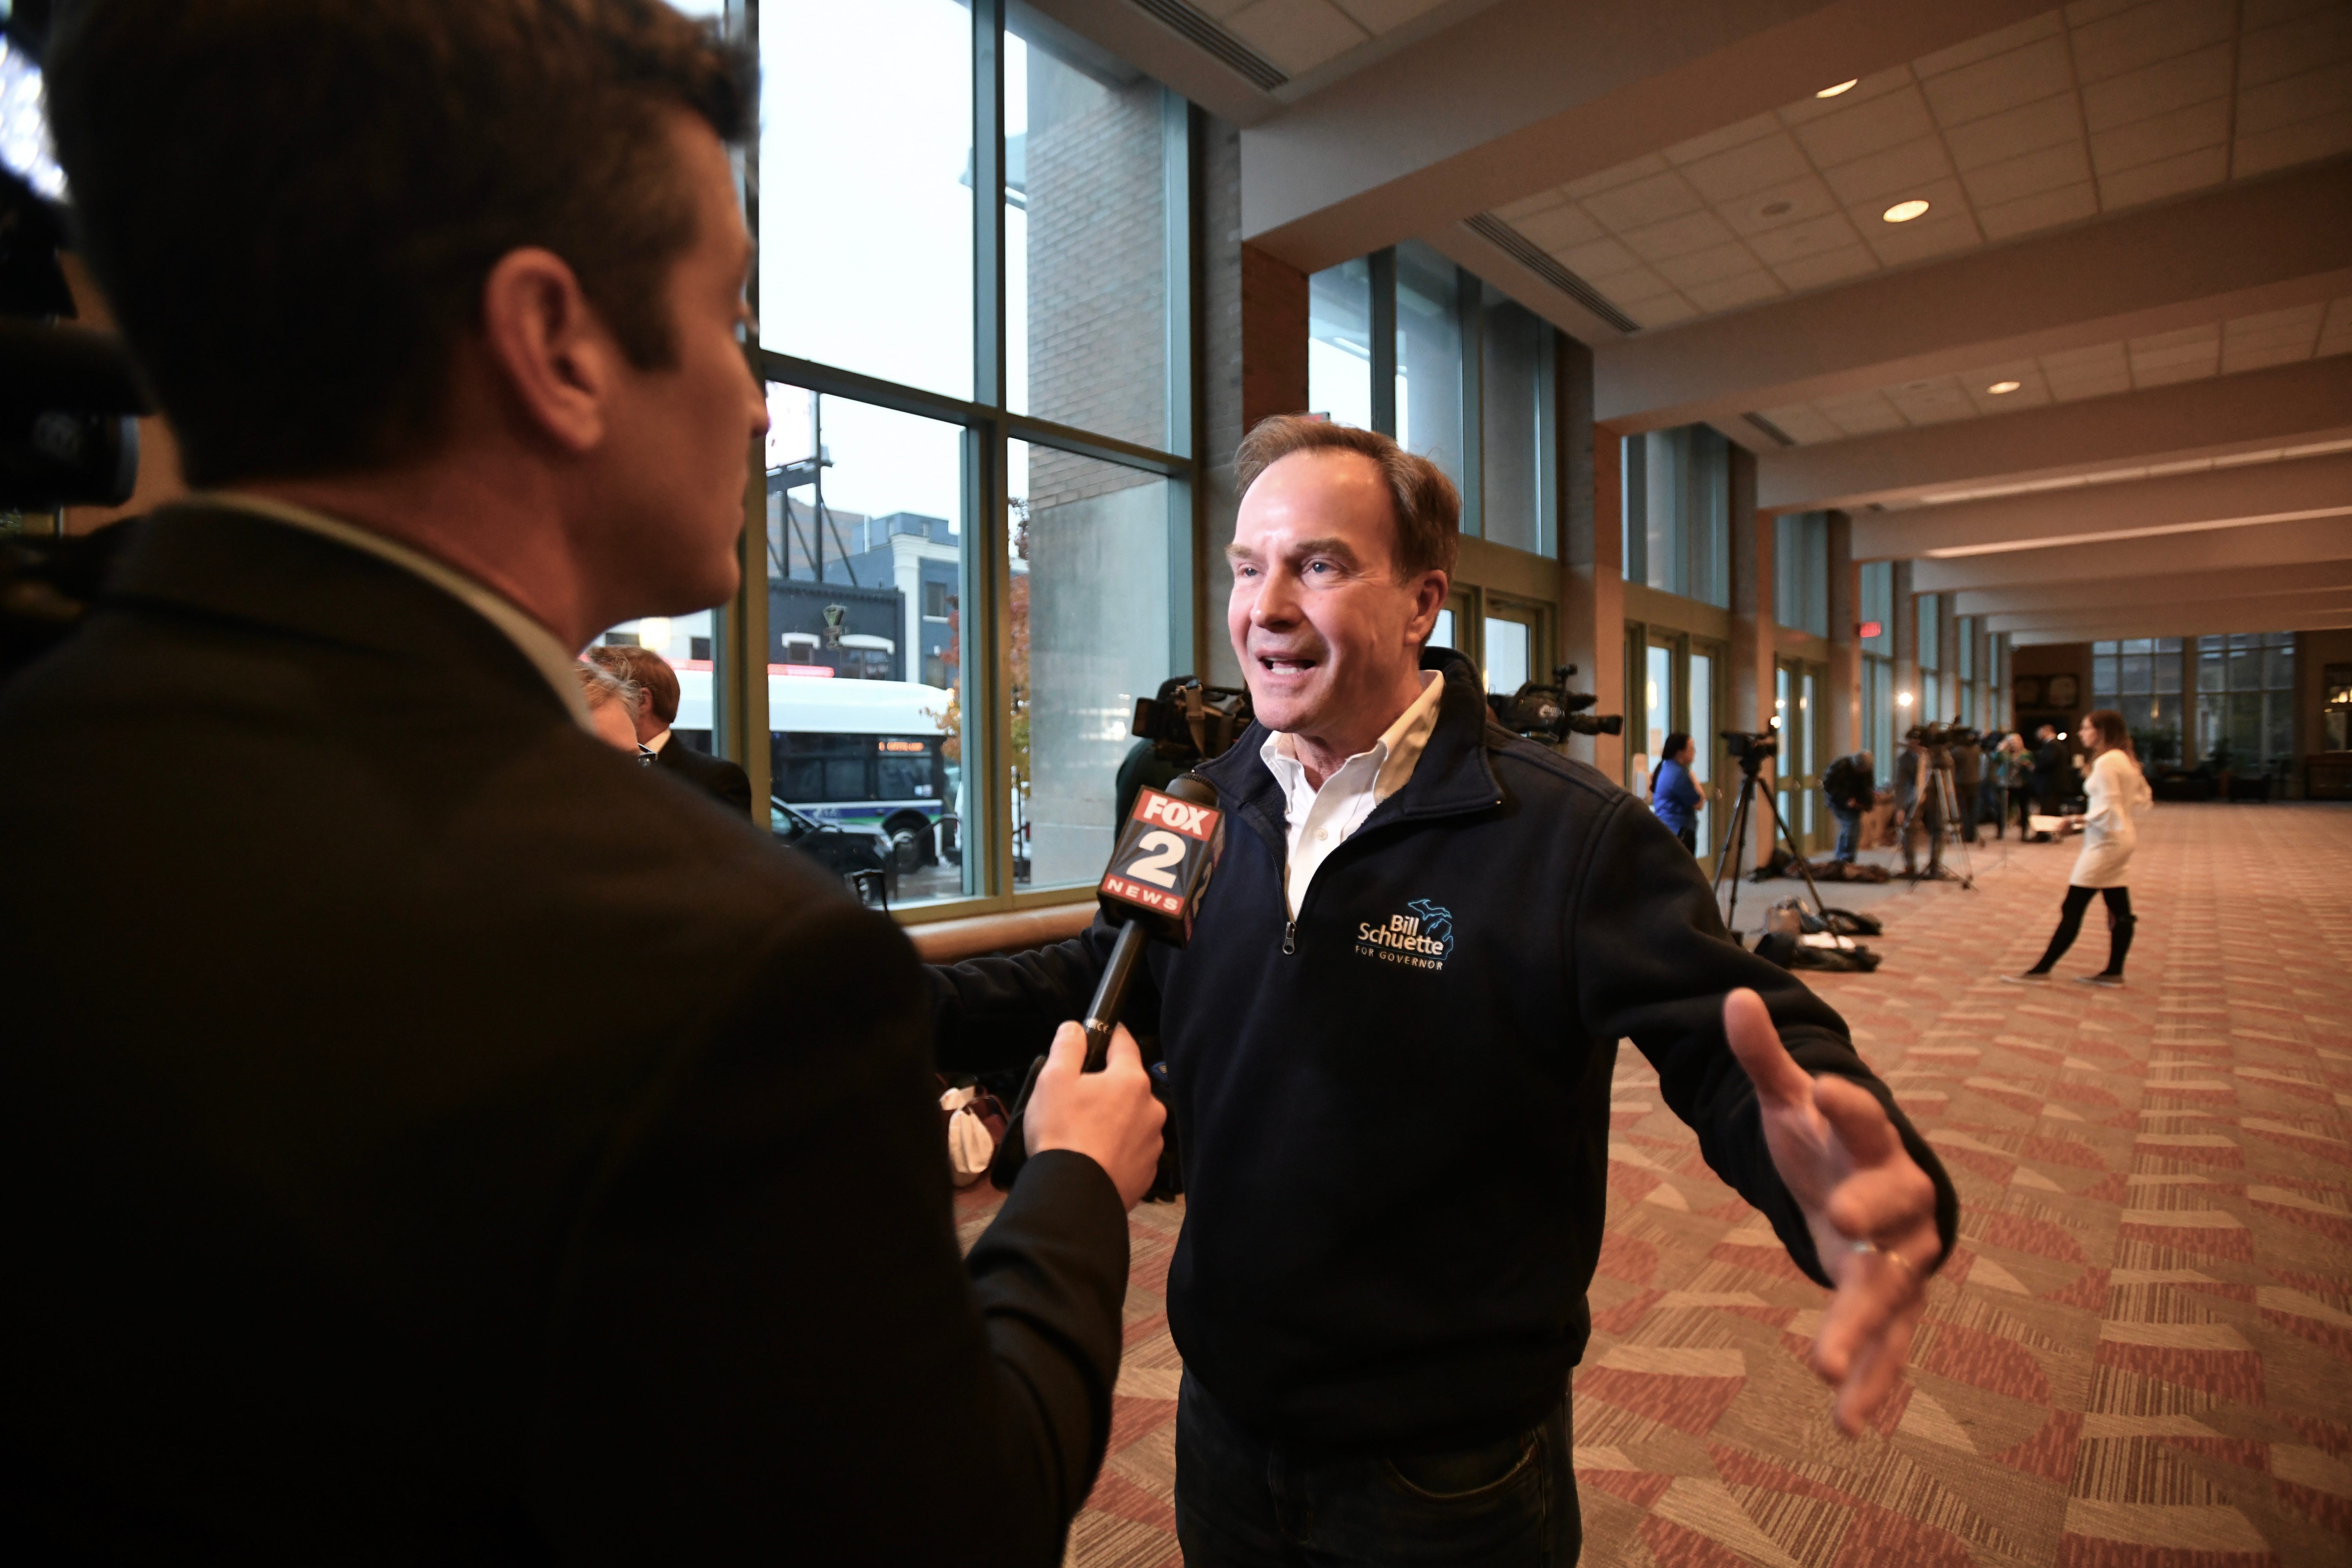 Bill Schuette talks with a TV reporter at the Lansing Center on Tuesday evening before the GOP election night party on November, 6, 2018.